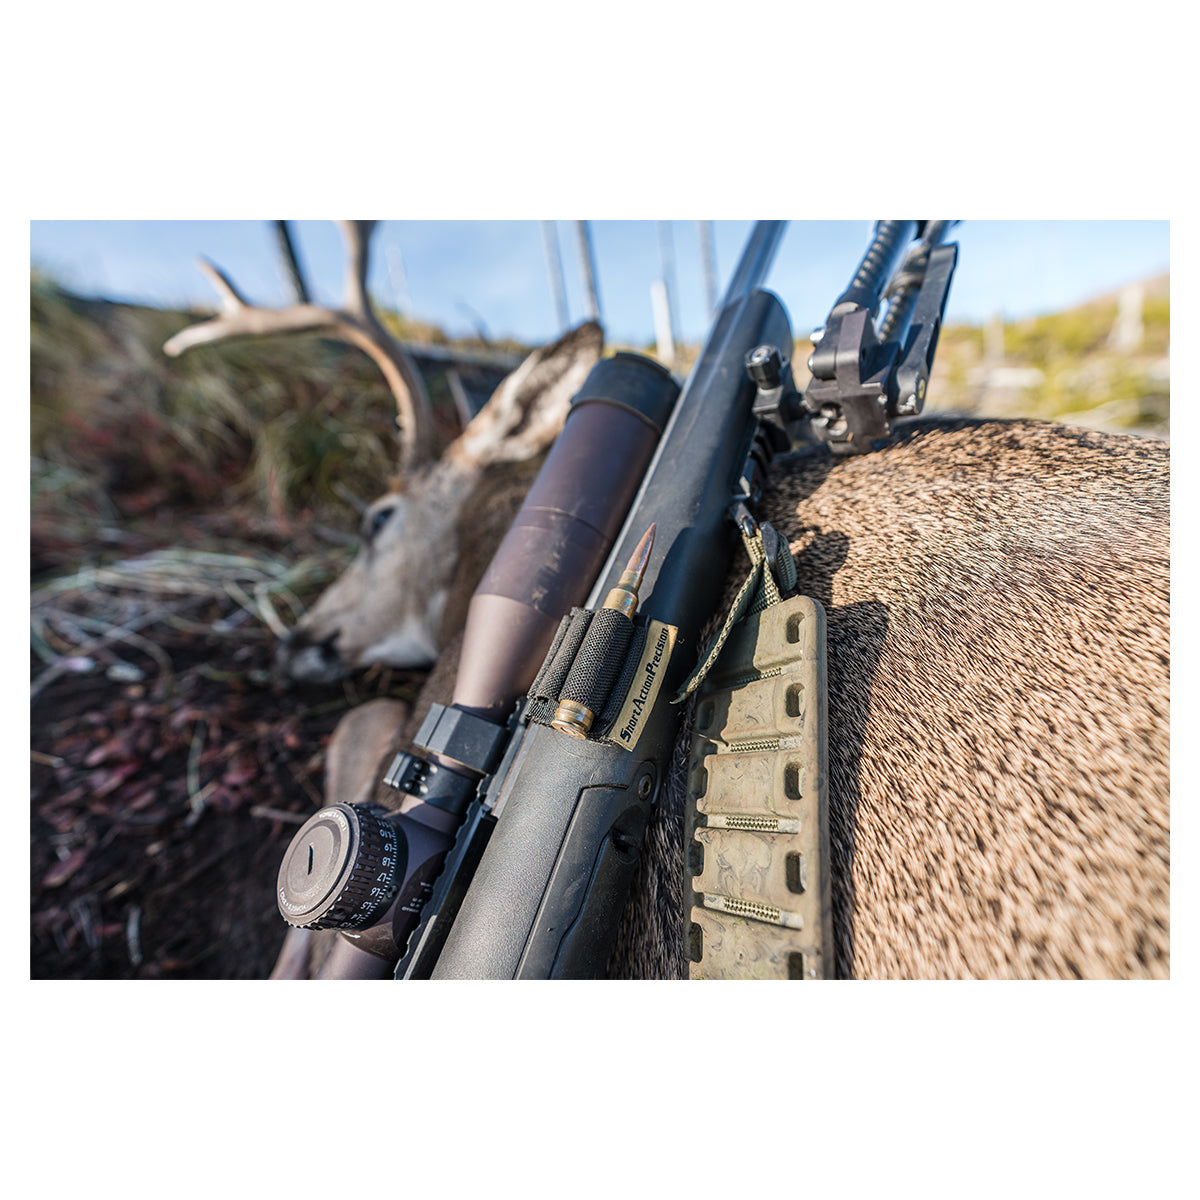 Short Action Precision Two Round Holder in  by GOHUNT | Short Action Precision - GOHUNT Shop